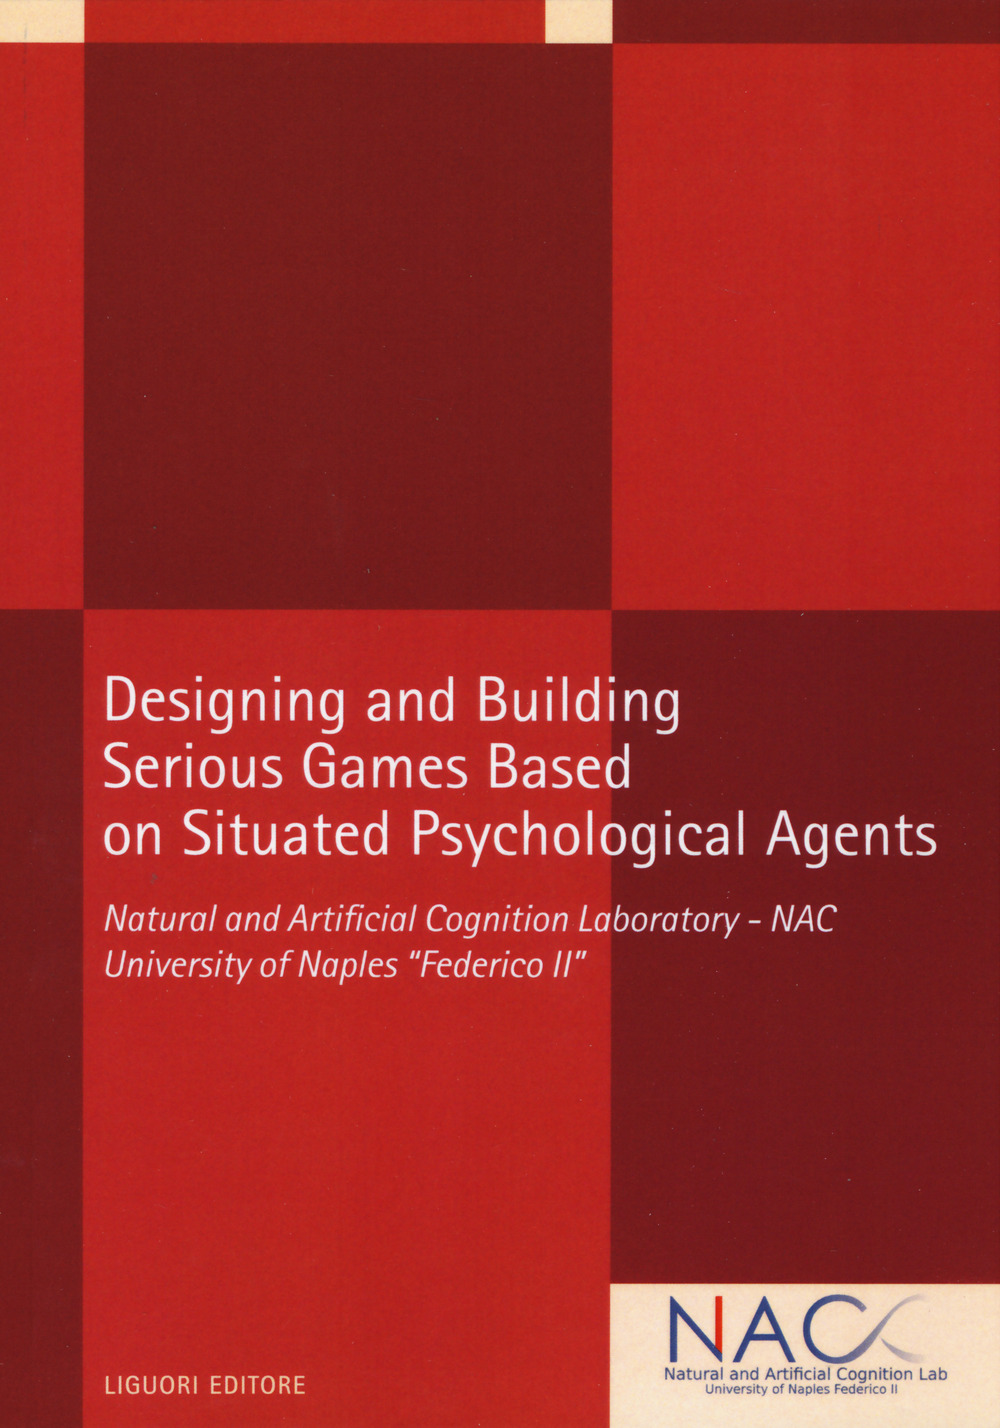 Designing and building serious games based on situated psychological agents